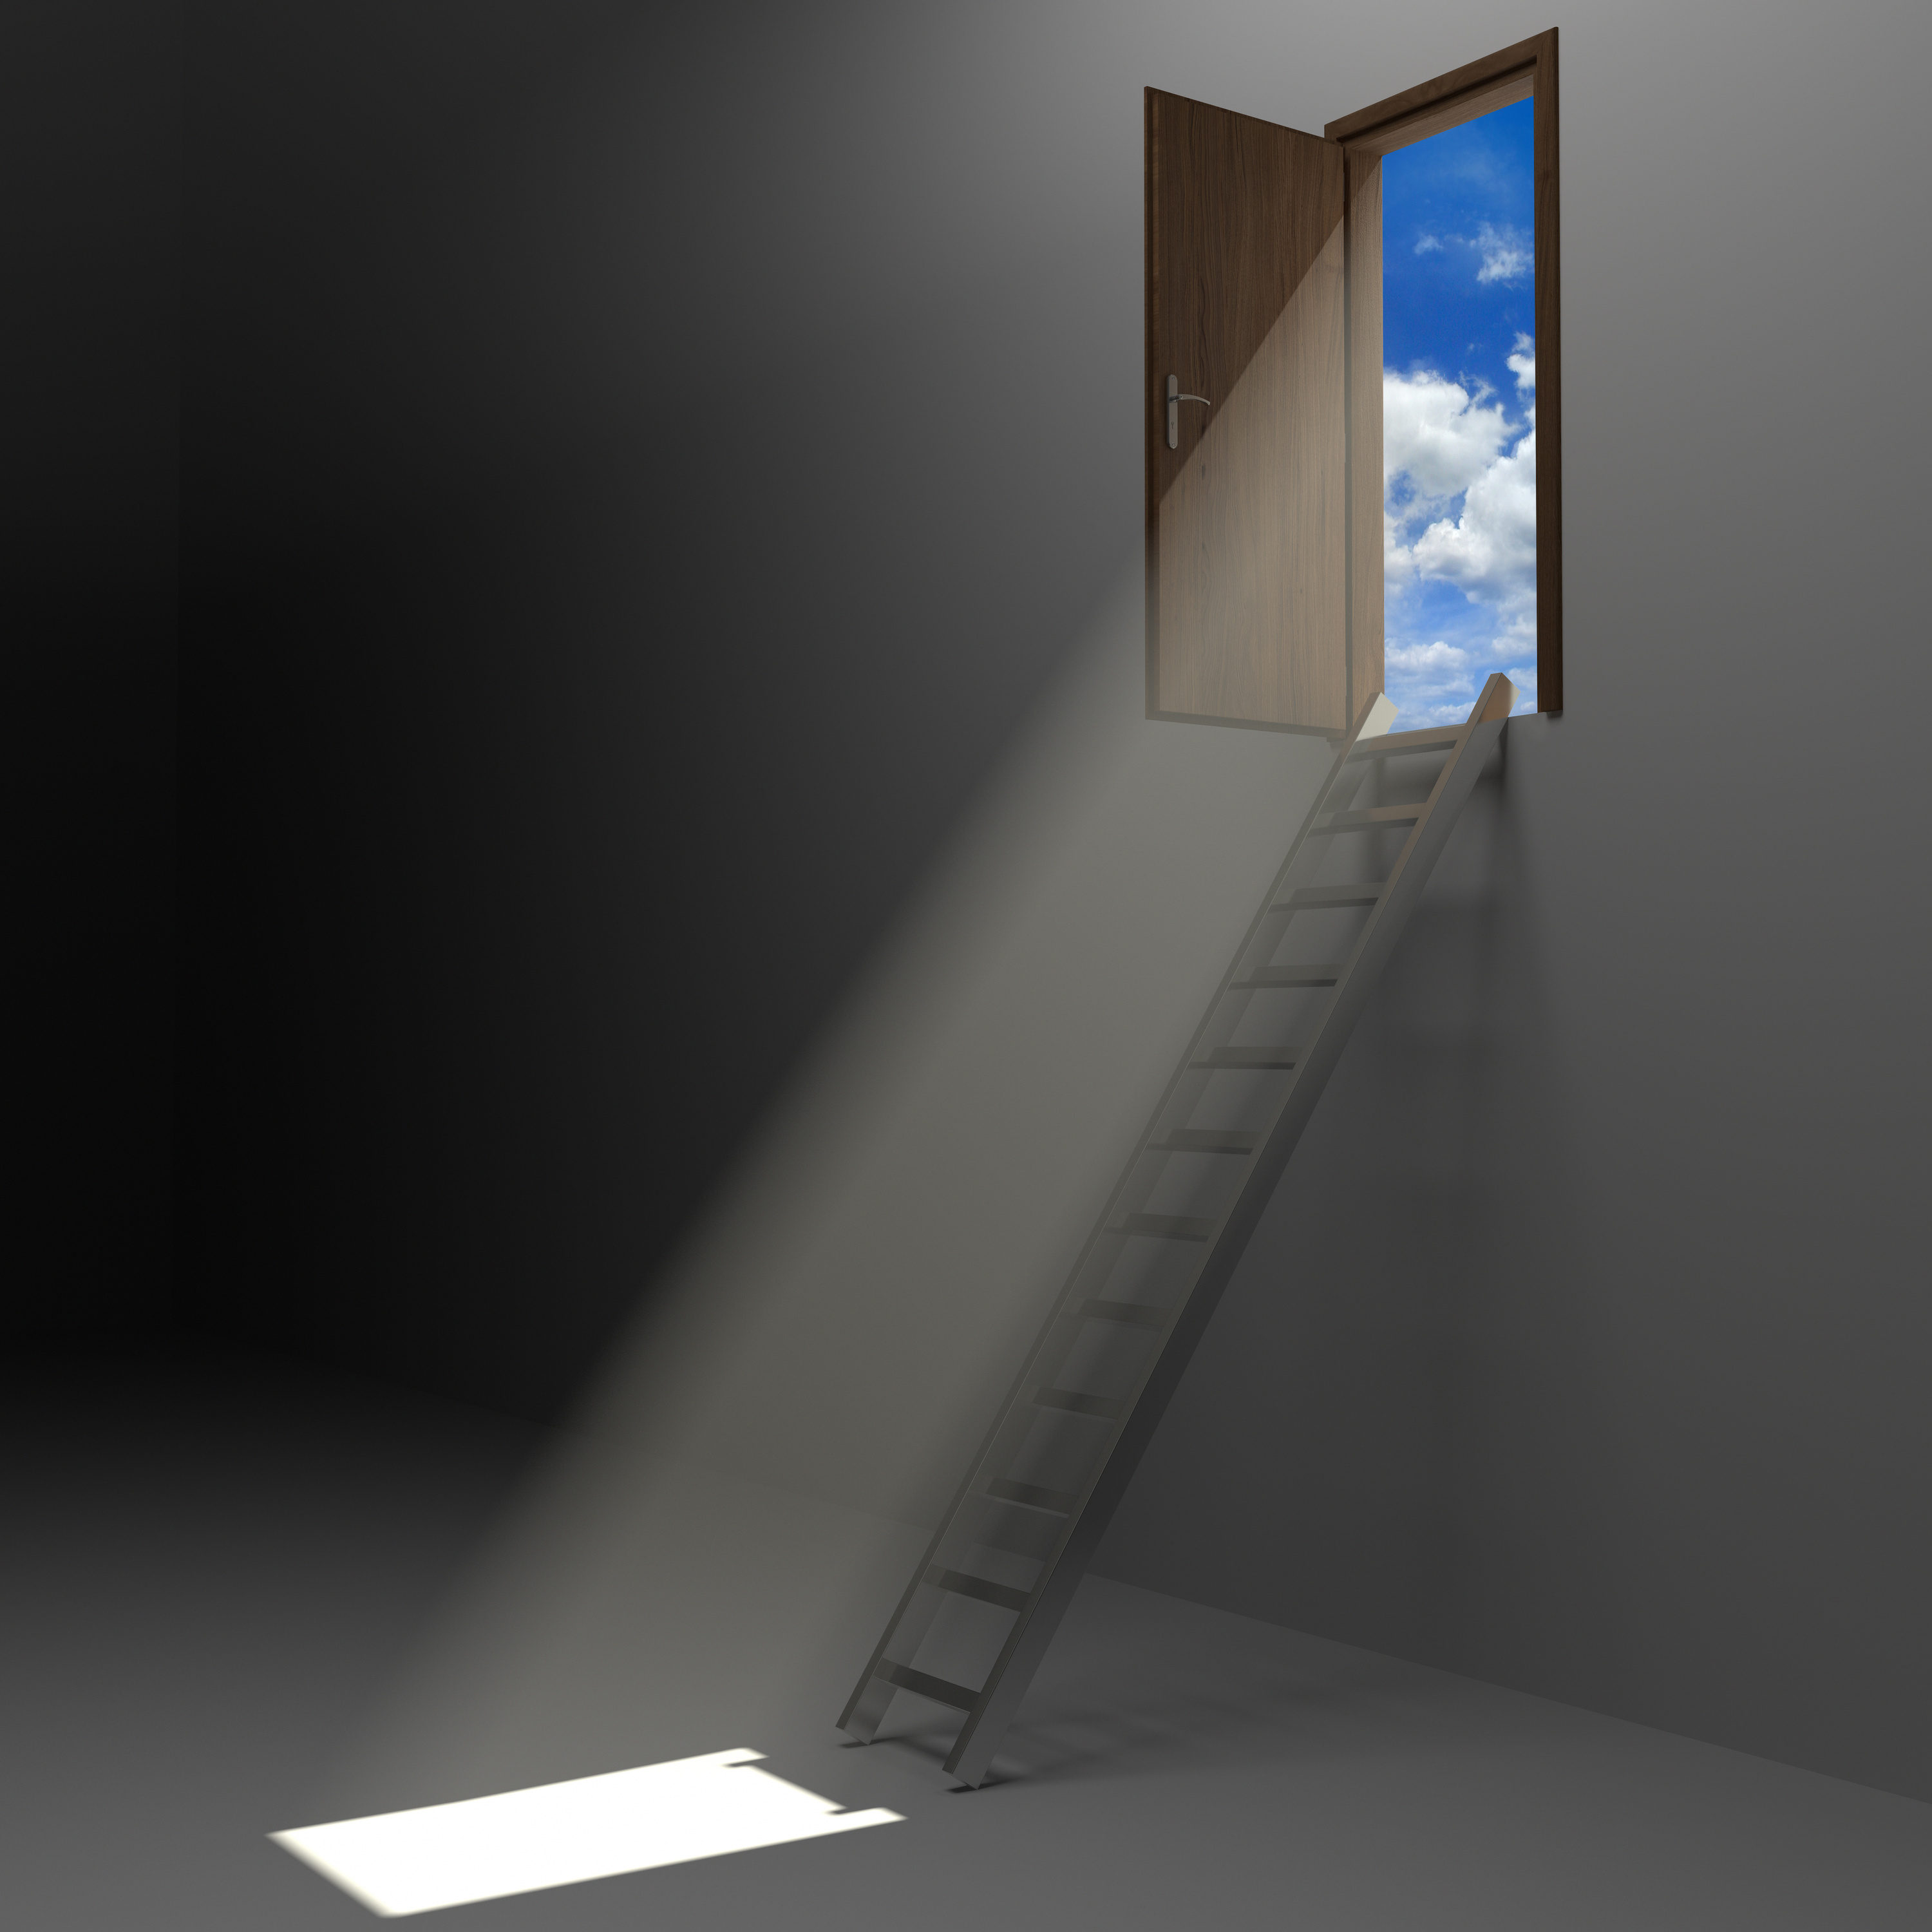 Ladder to freedom